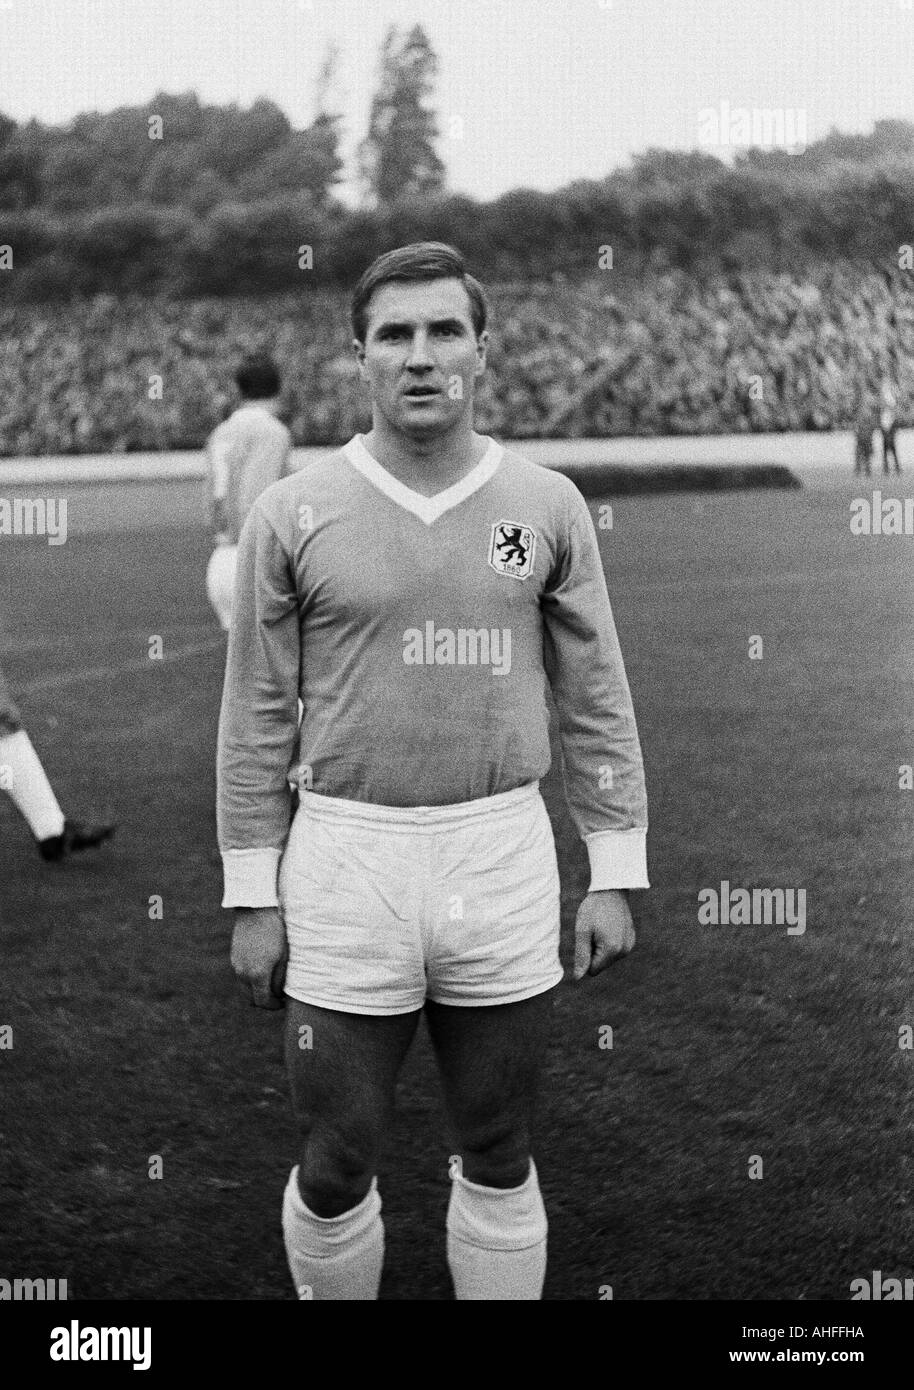 1860 munich Black and White Stock Photos & Images - Alamy